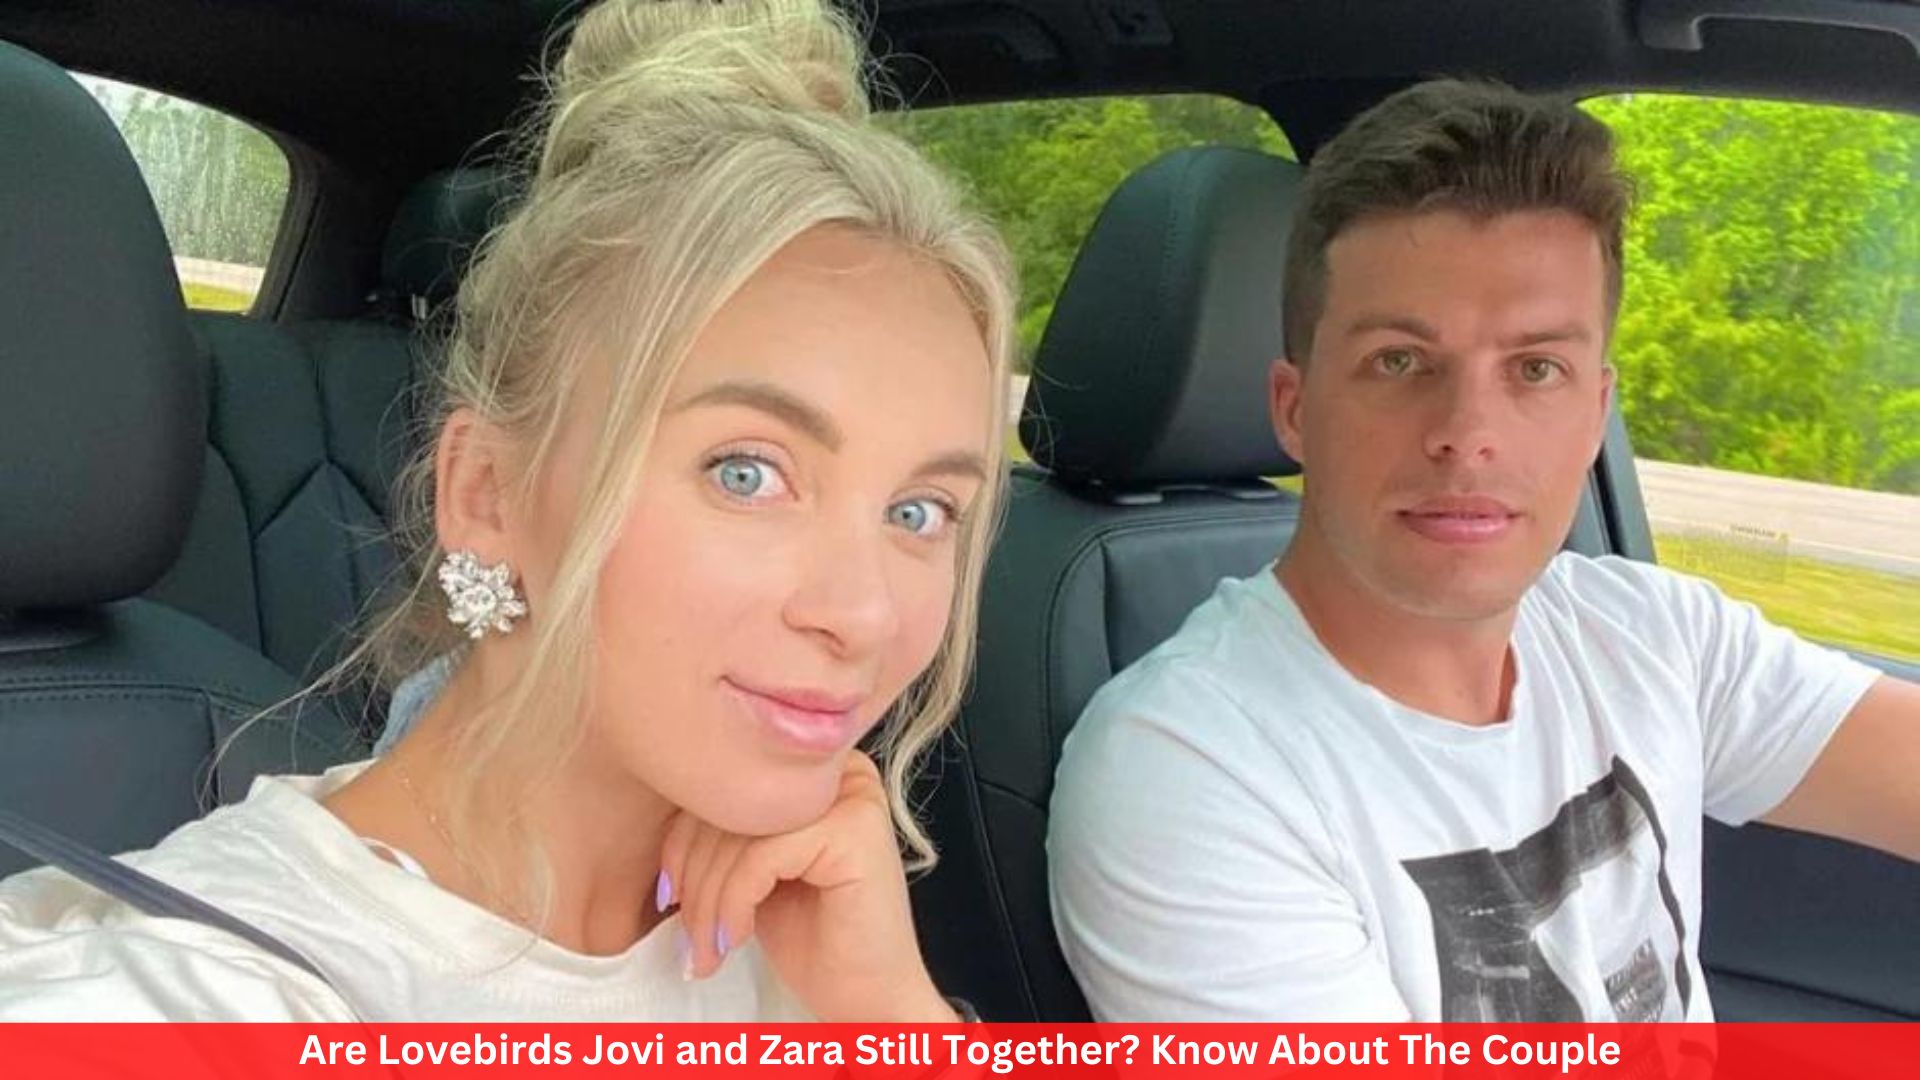 Are Lovebirds Jovi and Zara Still Together? Know About The Couple